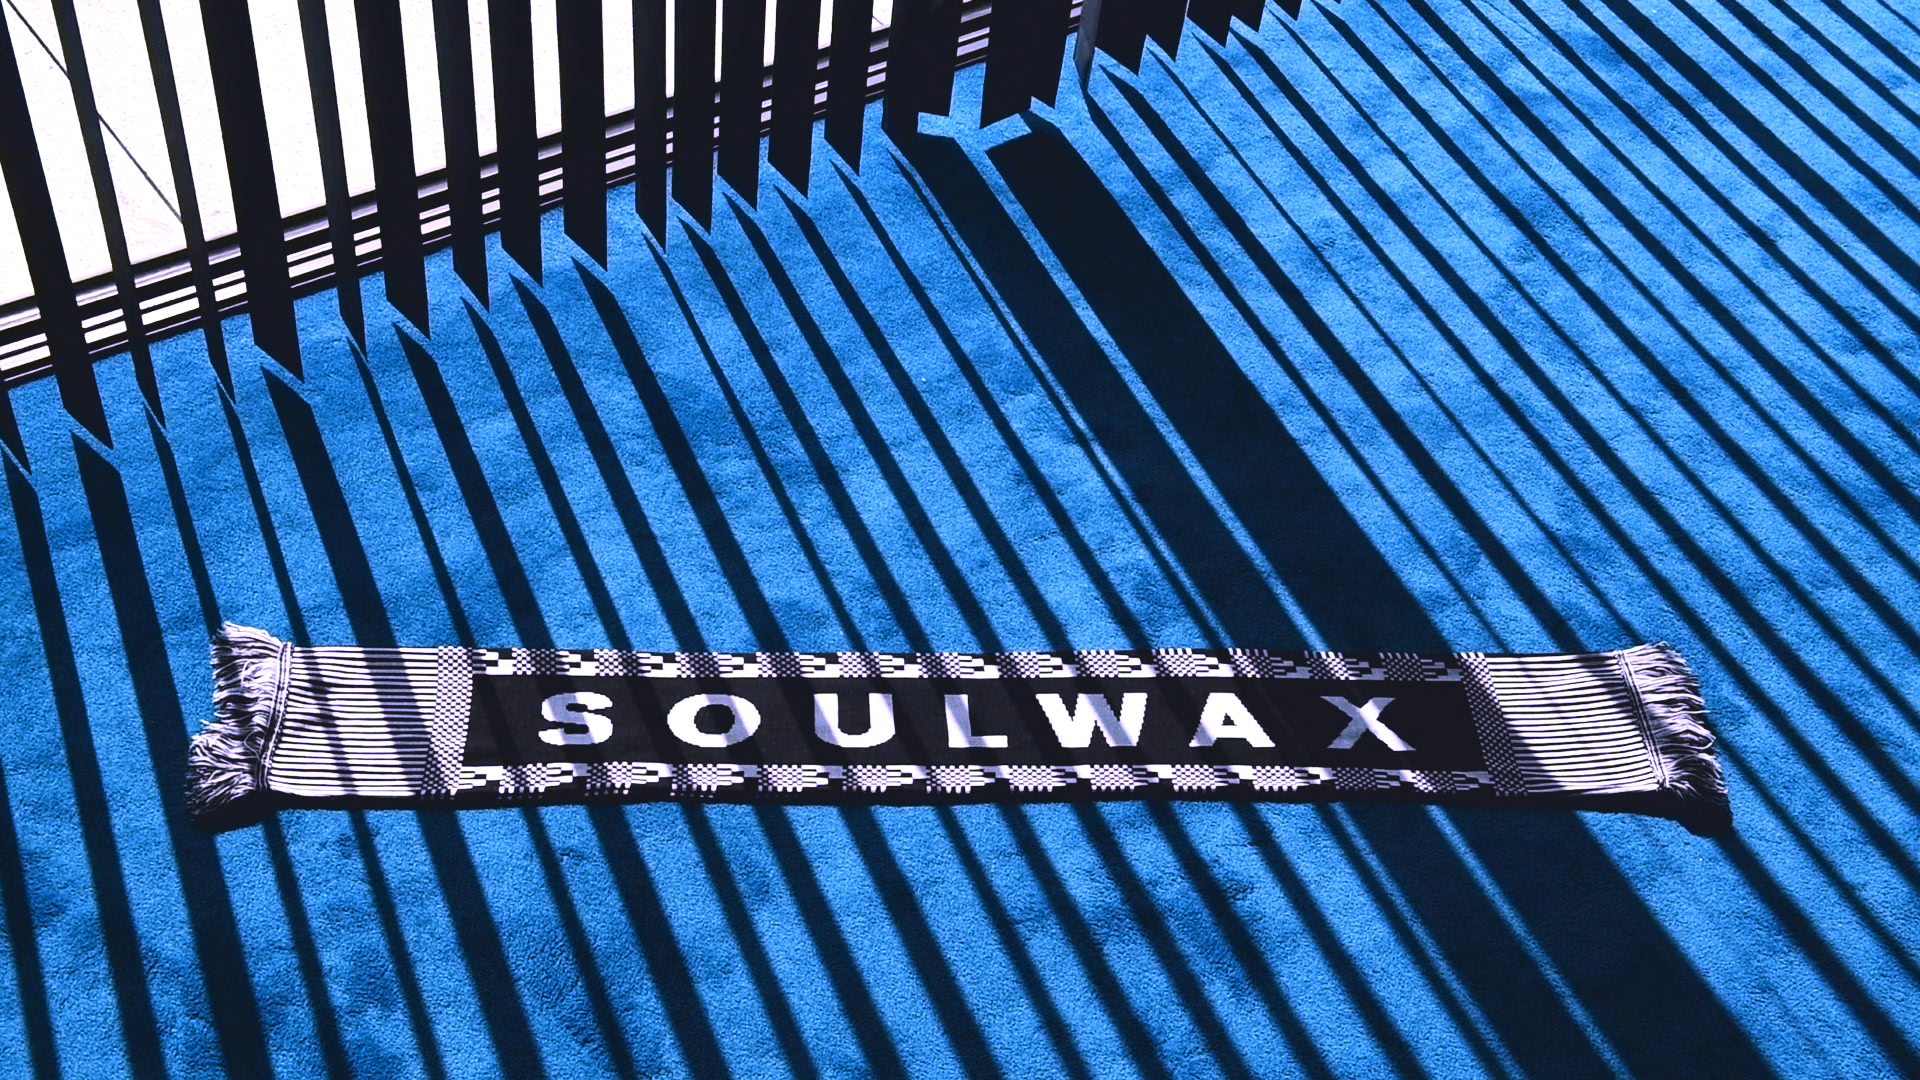 A scarf with "Soulwax" written on it lays on a blue carpet